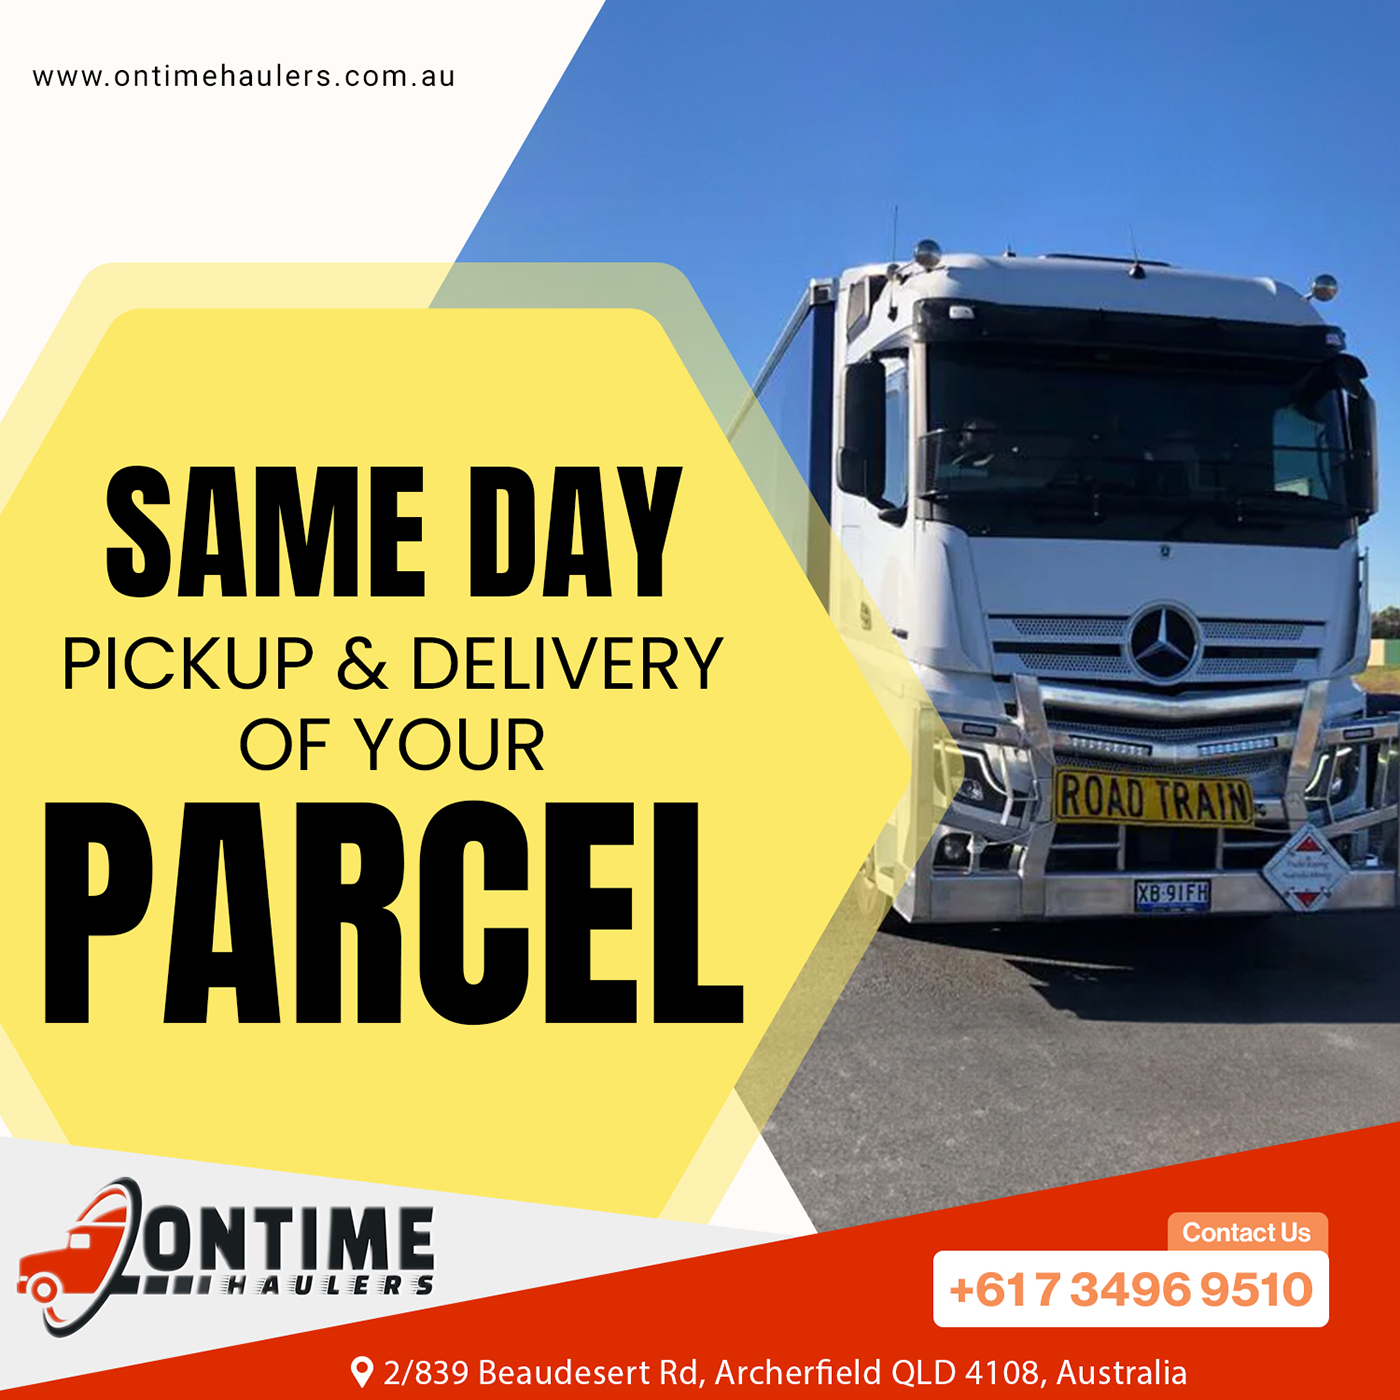 Same Day Courier & Delivery Service in Brisbane